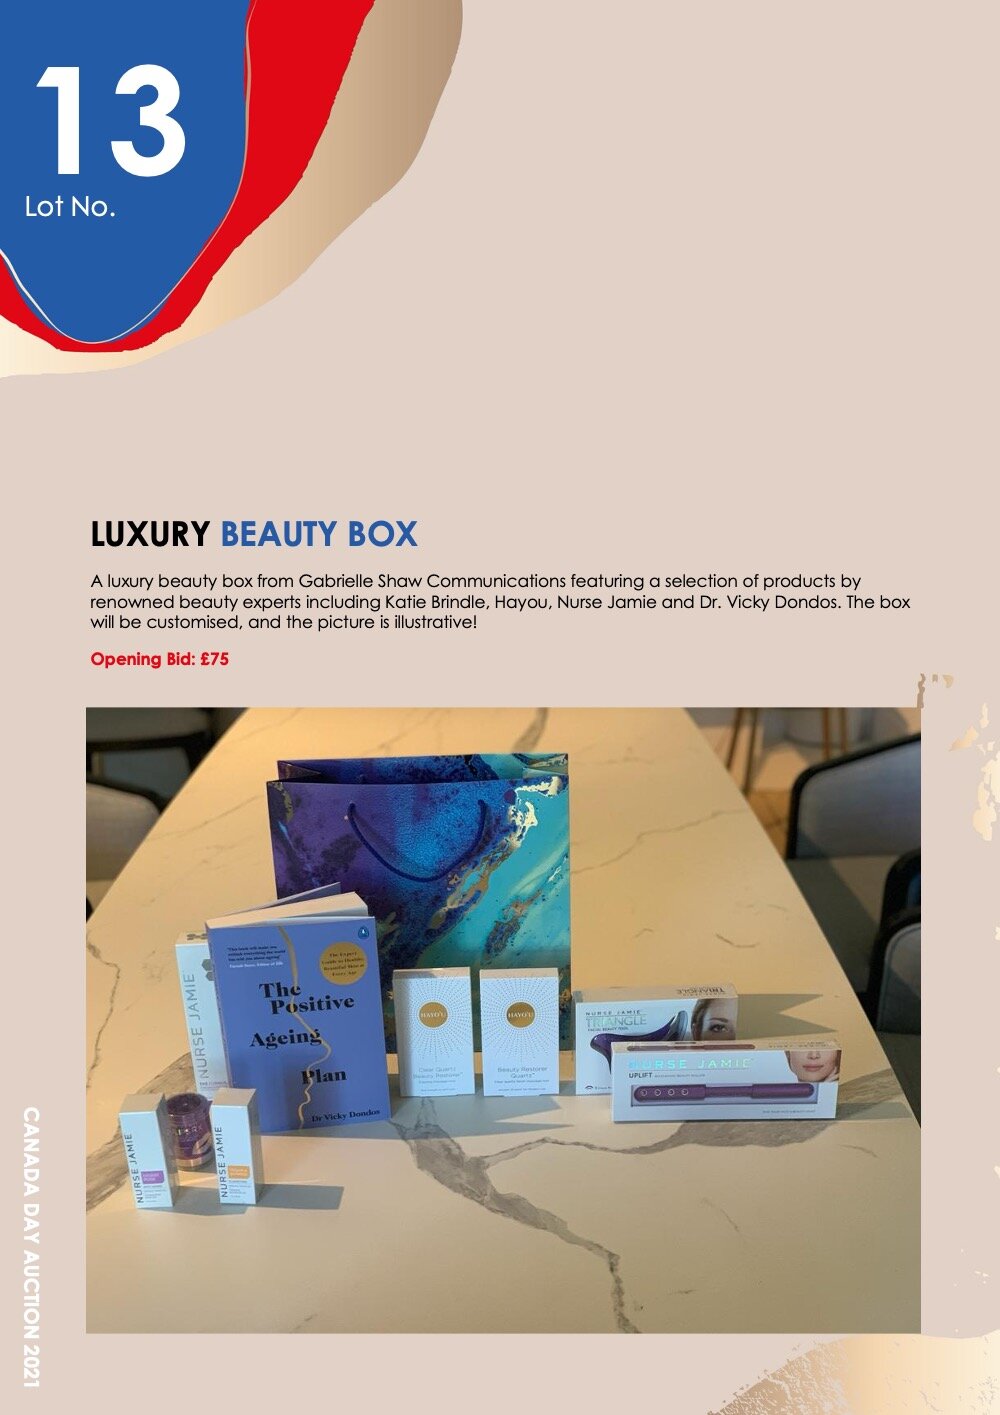   Lot 14LUXURY BEAUTY BOX    A luxury beauty box from Gabrielle Shaw Communications featuring a selection of products by renowned beauty experts including Katie Brindle, Hayou, Nurse Jamie and Dr. Vicky Dondos. The box will be customised, and the pic